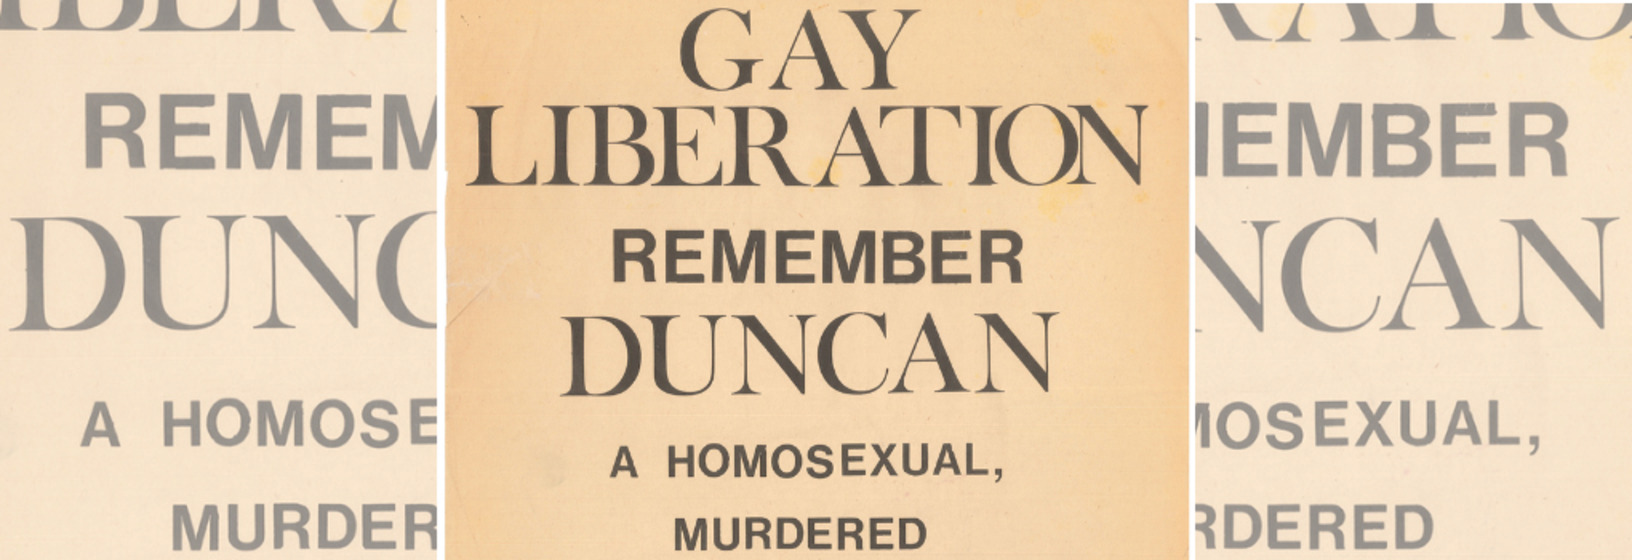 Poster, black text on buff paper, for demonstration commemorating the murder of George Duncan, collaged to create a banner image